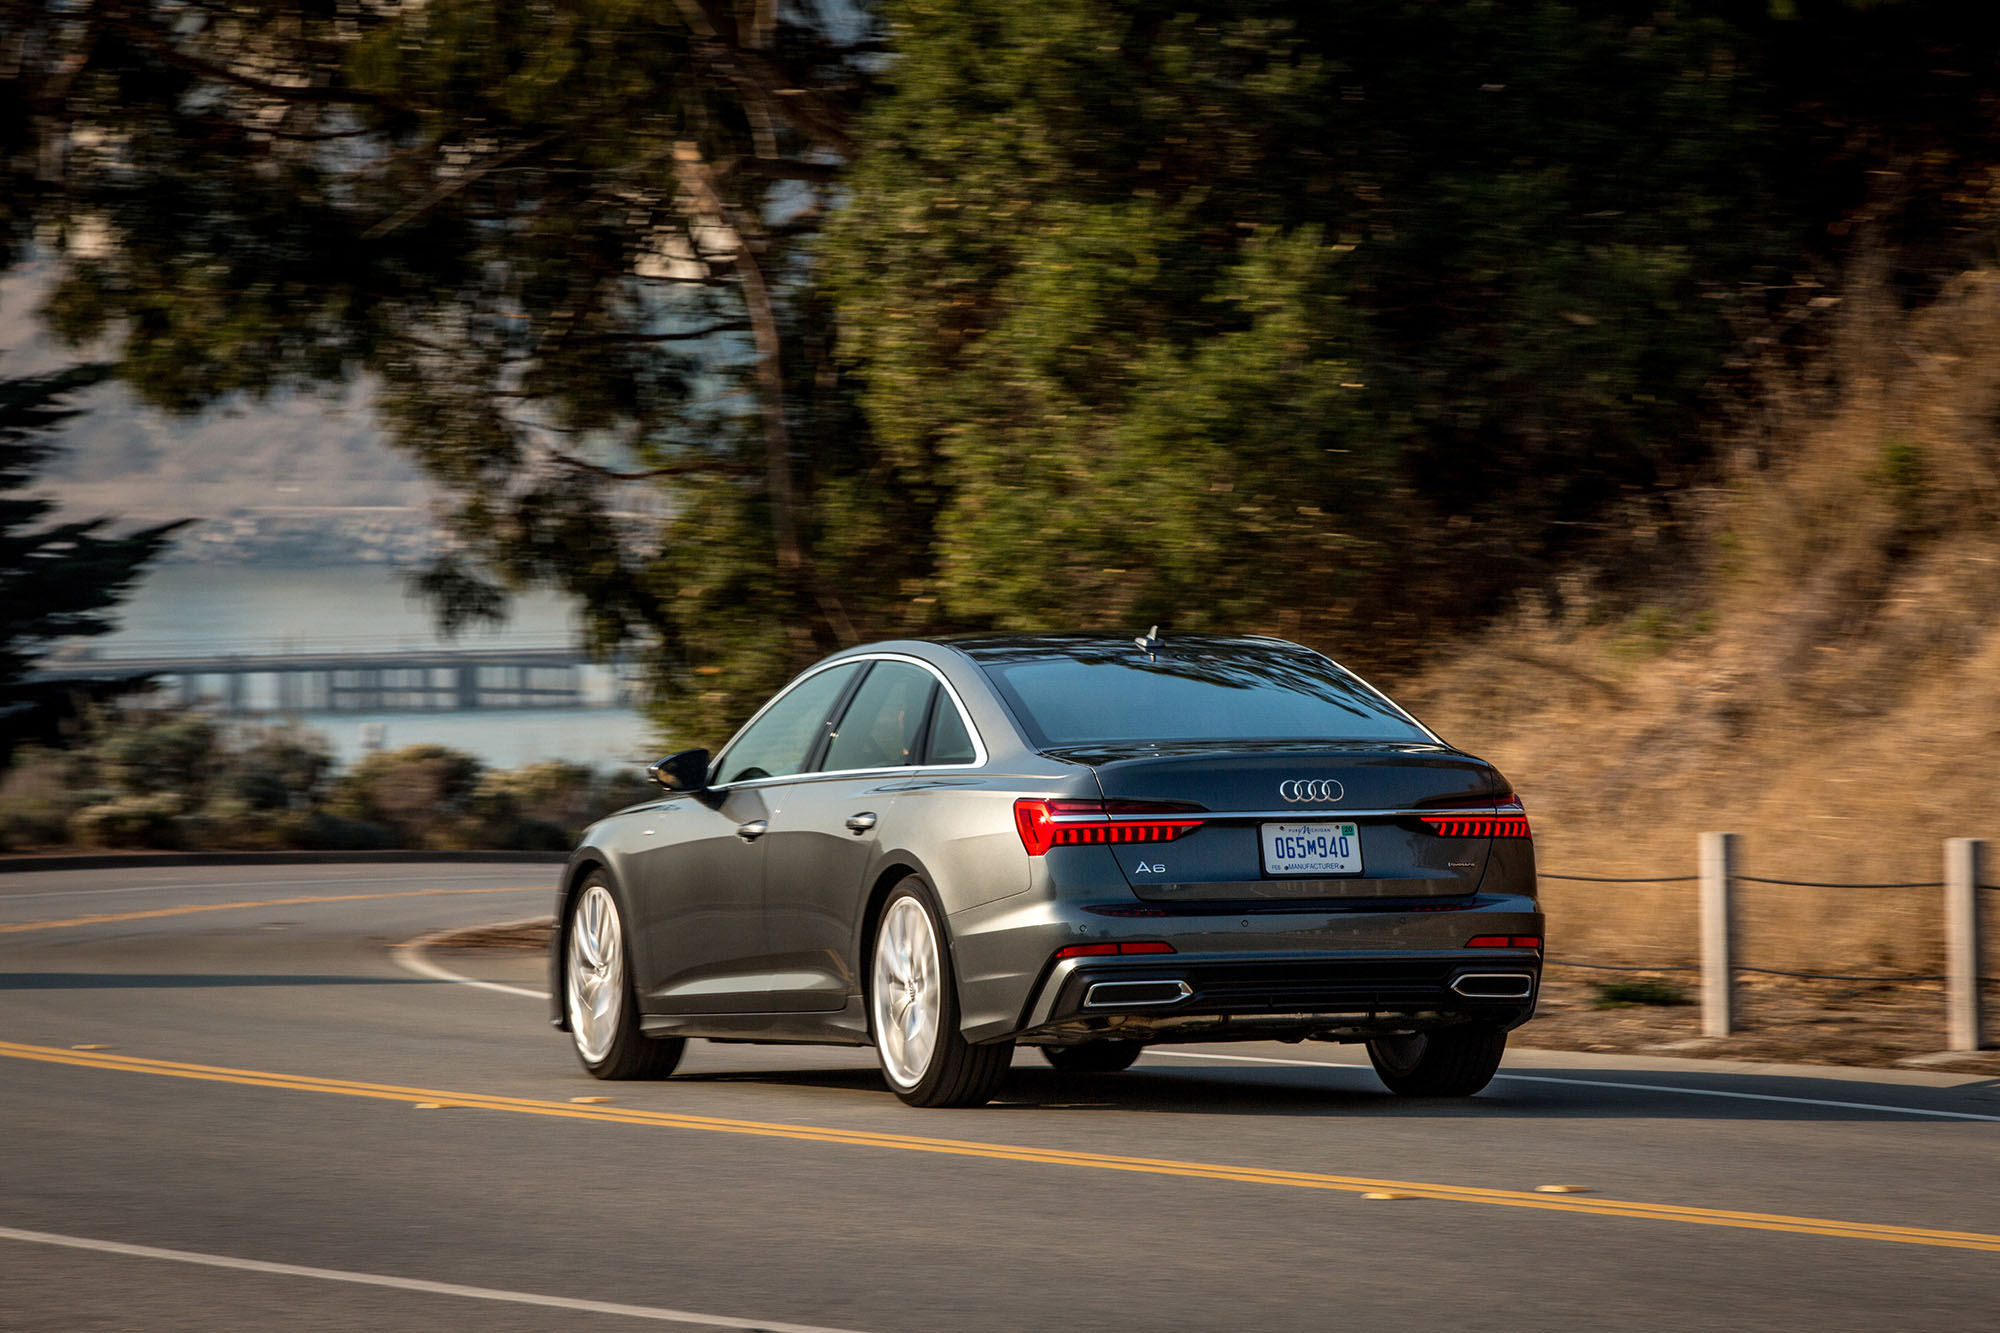 Rear view of a gray Audi A6 driving.